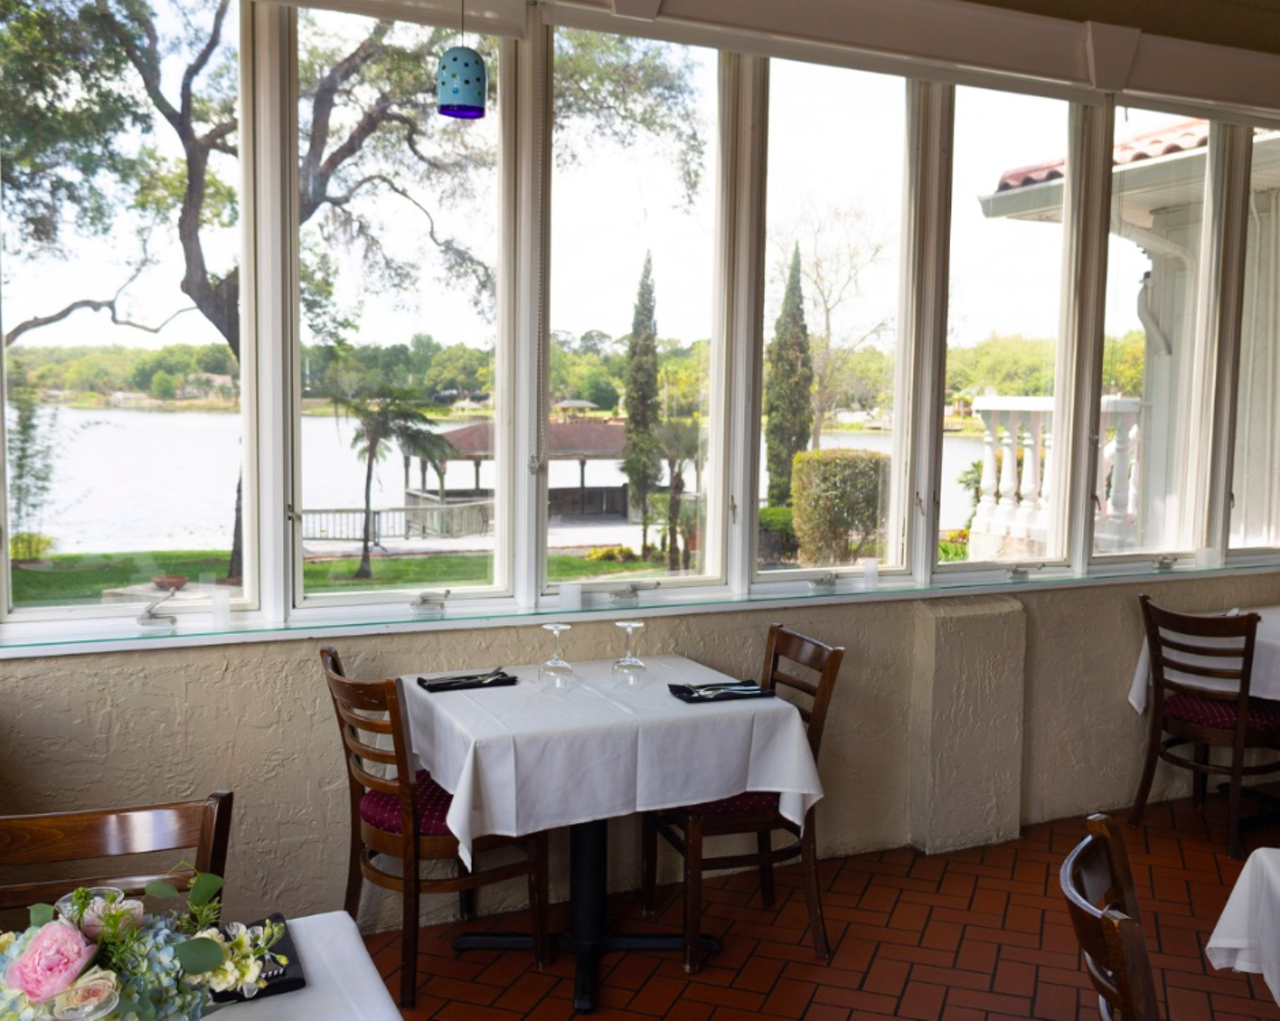 Enzo's on the Lake
1130 S. U.S. Highway 17-92, Longwood
Enzo’s on the Lake got its start in a small Central Florida home in 1980. Over the years, the restaurant has become the area's go-to scenic dining destination, serving Italian cuisine with a chic spin.